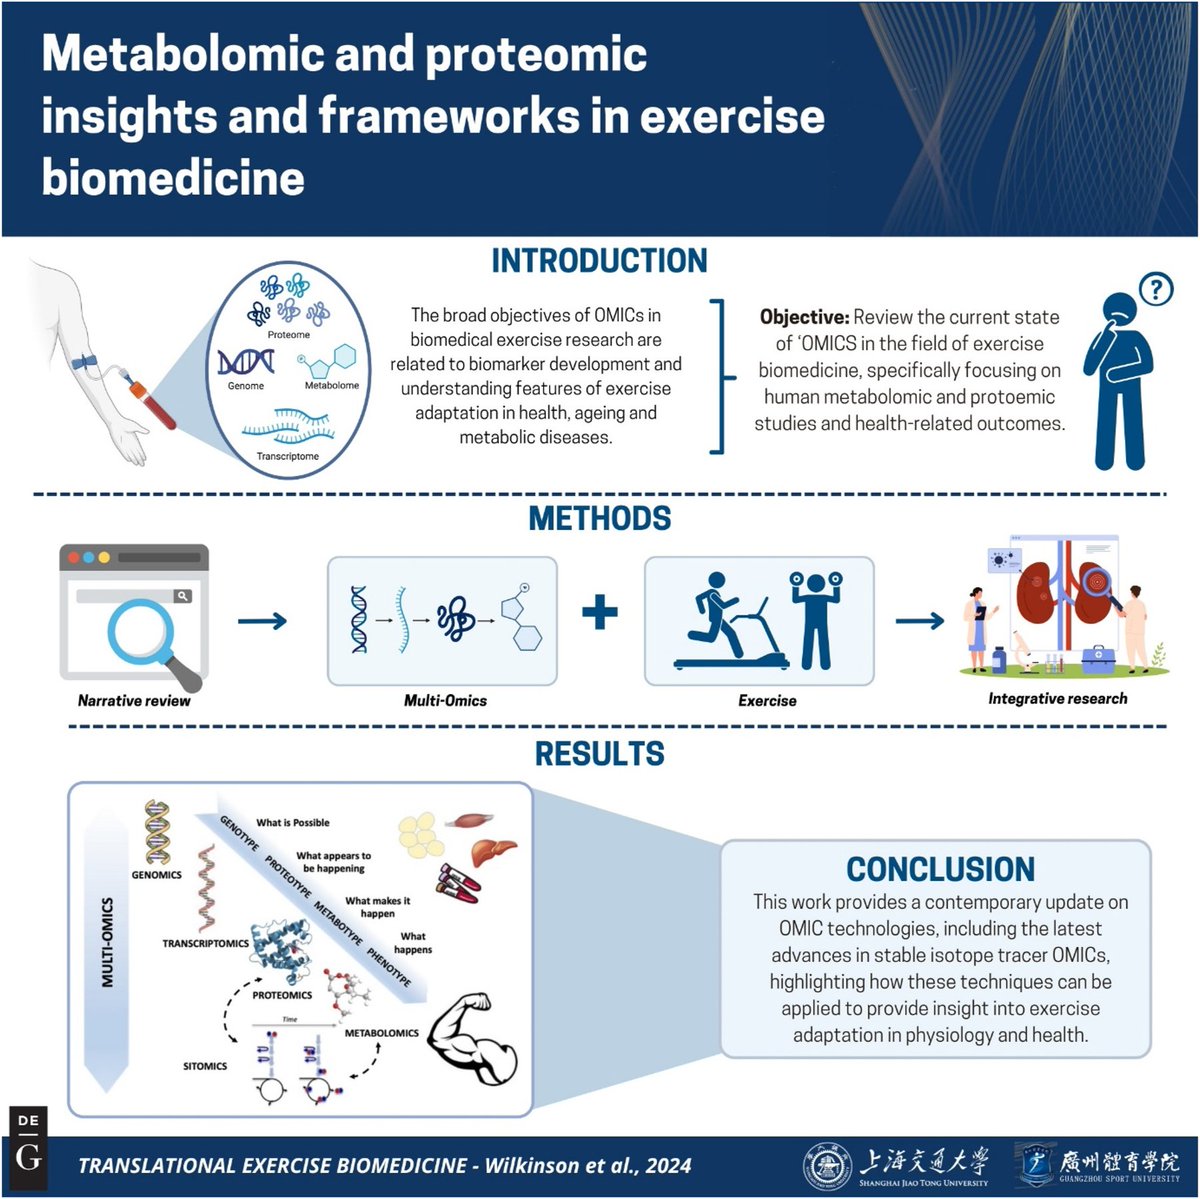 This review outlines the current state of ‘OMICS (specifically on metabolomic and proteomic studies) in the field of exercise biomedicine, particularly focusing on human studies and health-related outcomes.